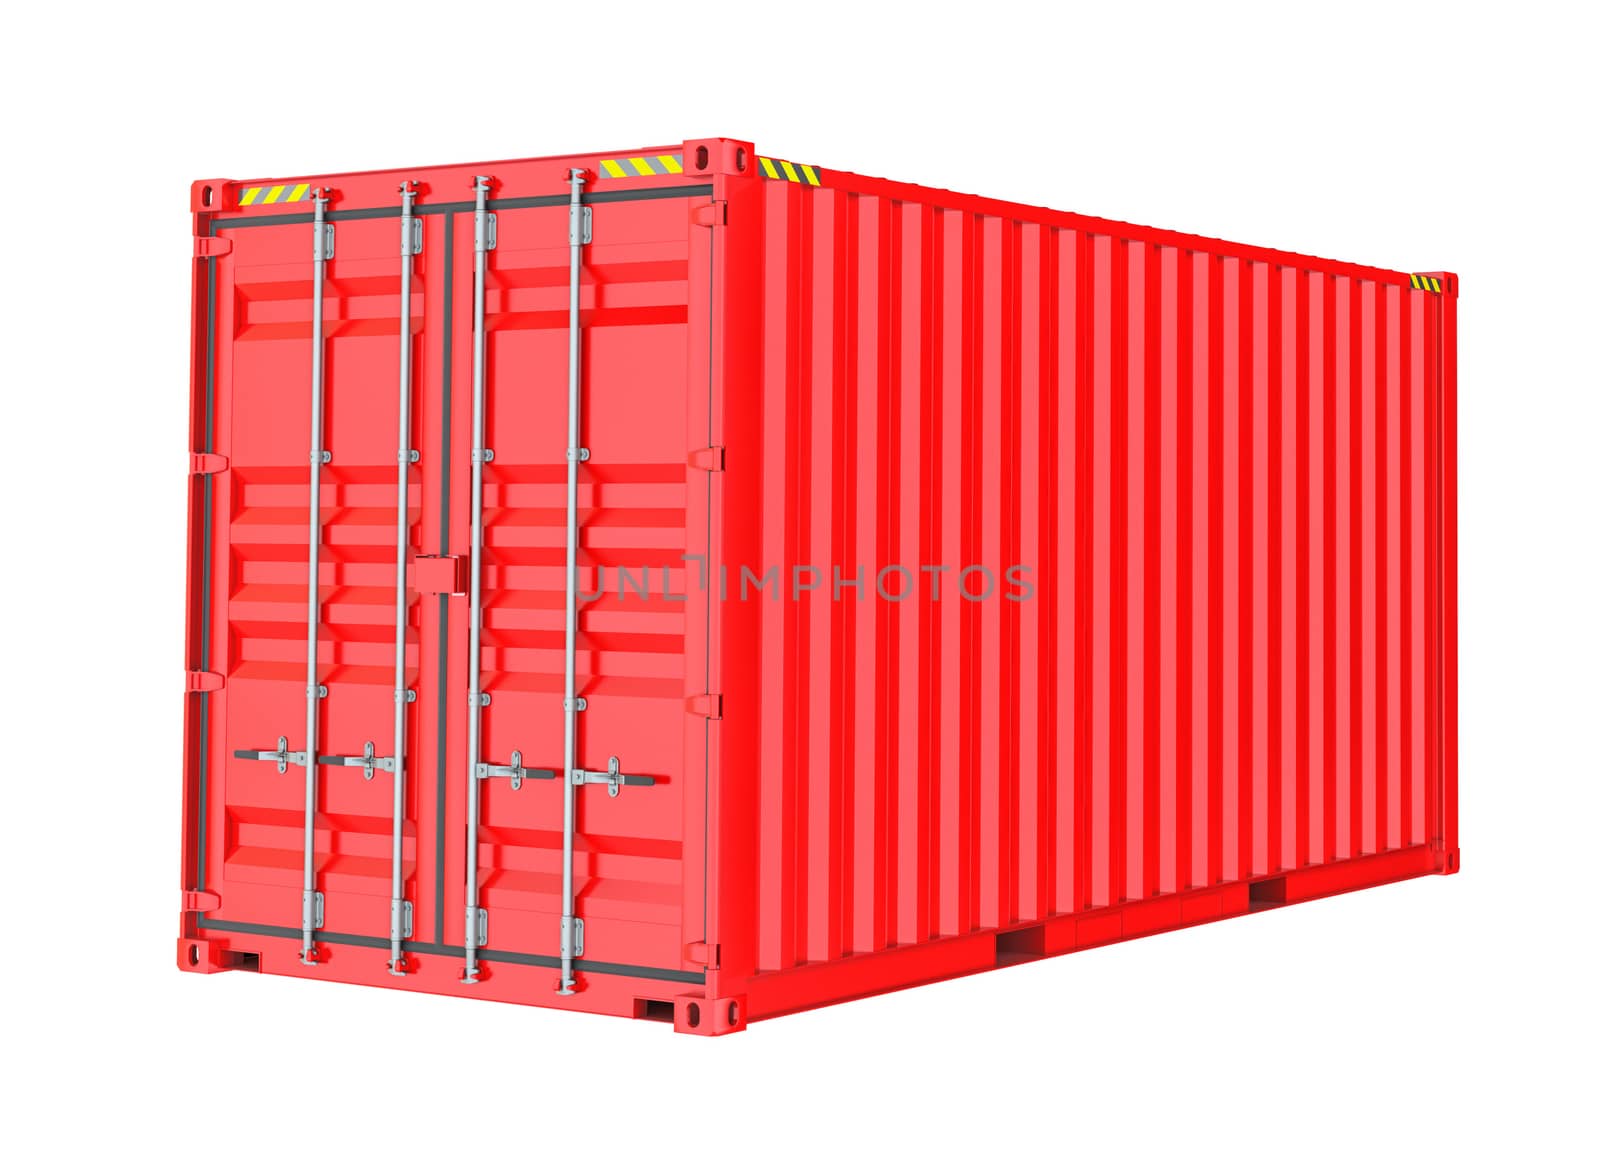 Red Cargo Container. Isoalted on white background. 3D Illustration